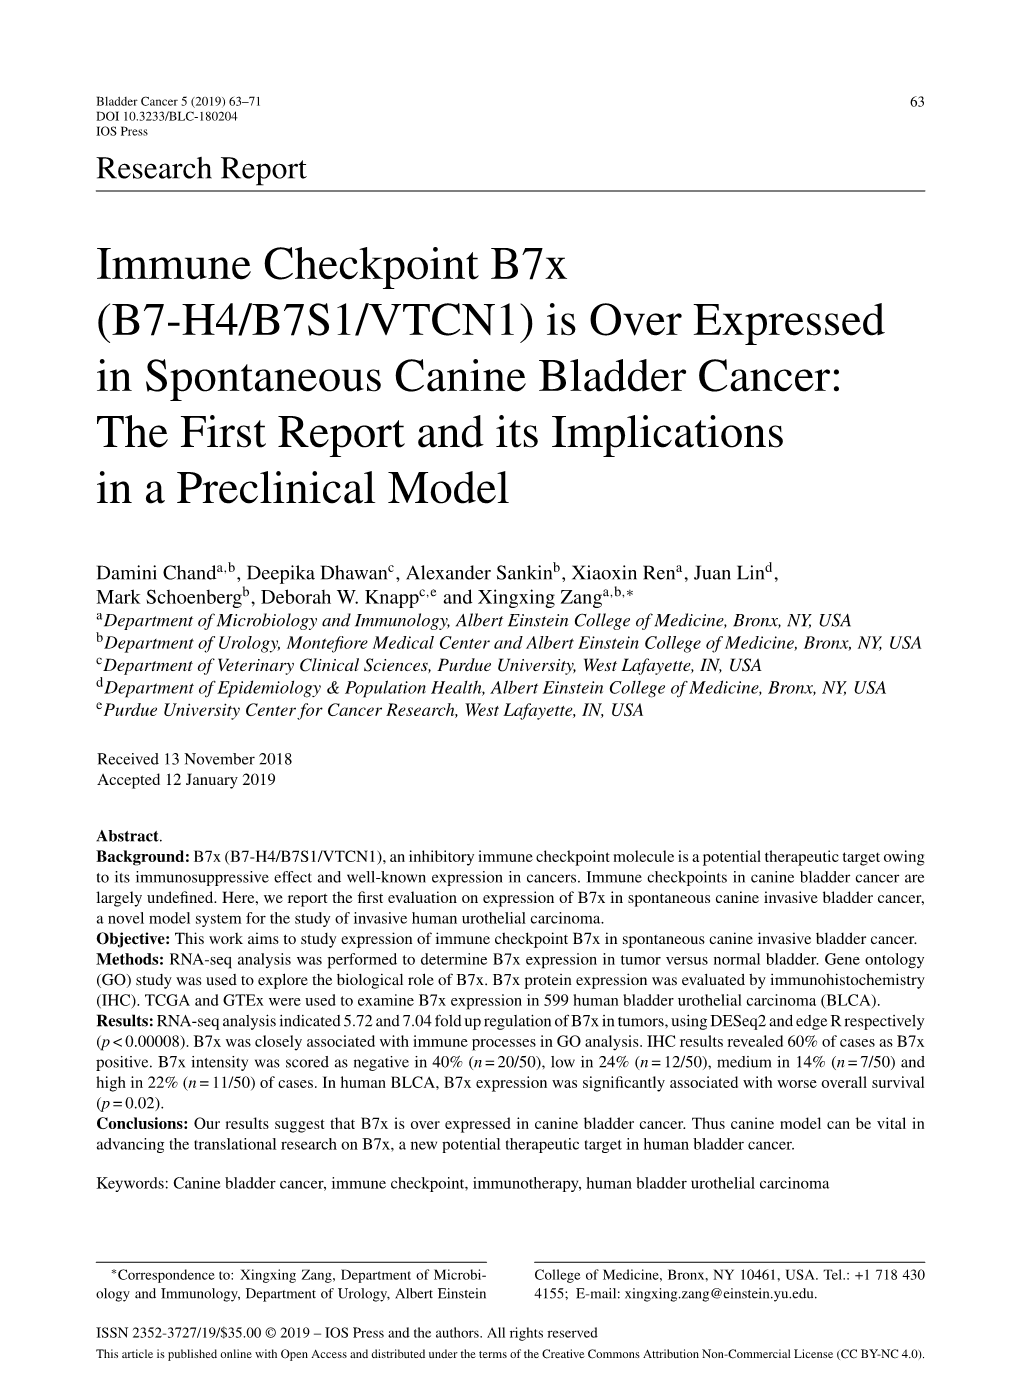 Immune Checkpoint B7x (B7-H4/B7S1/VTCN1) Is Over Expressed in Spontaneous Canine Bladder Cancer: the First Report and Its Implications in a Preclinical Model